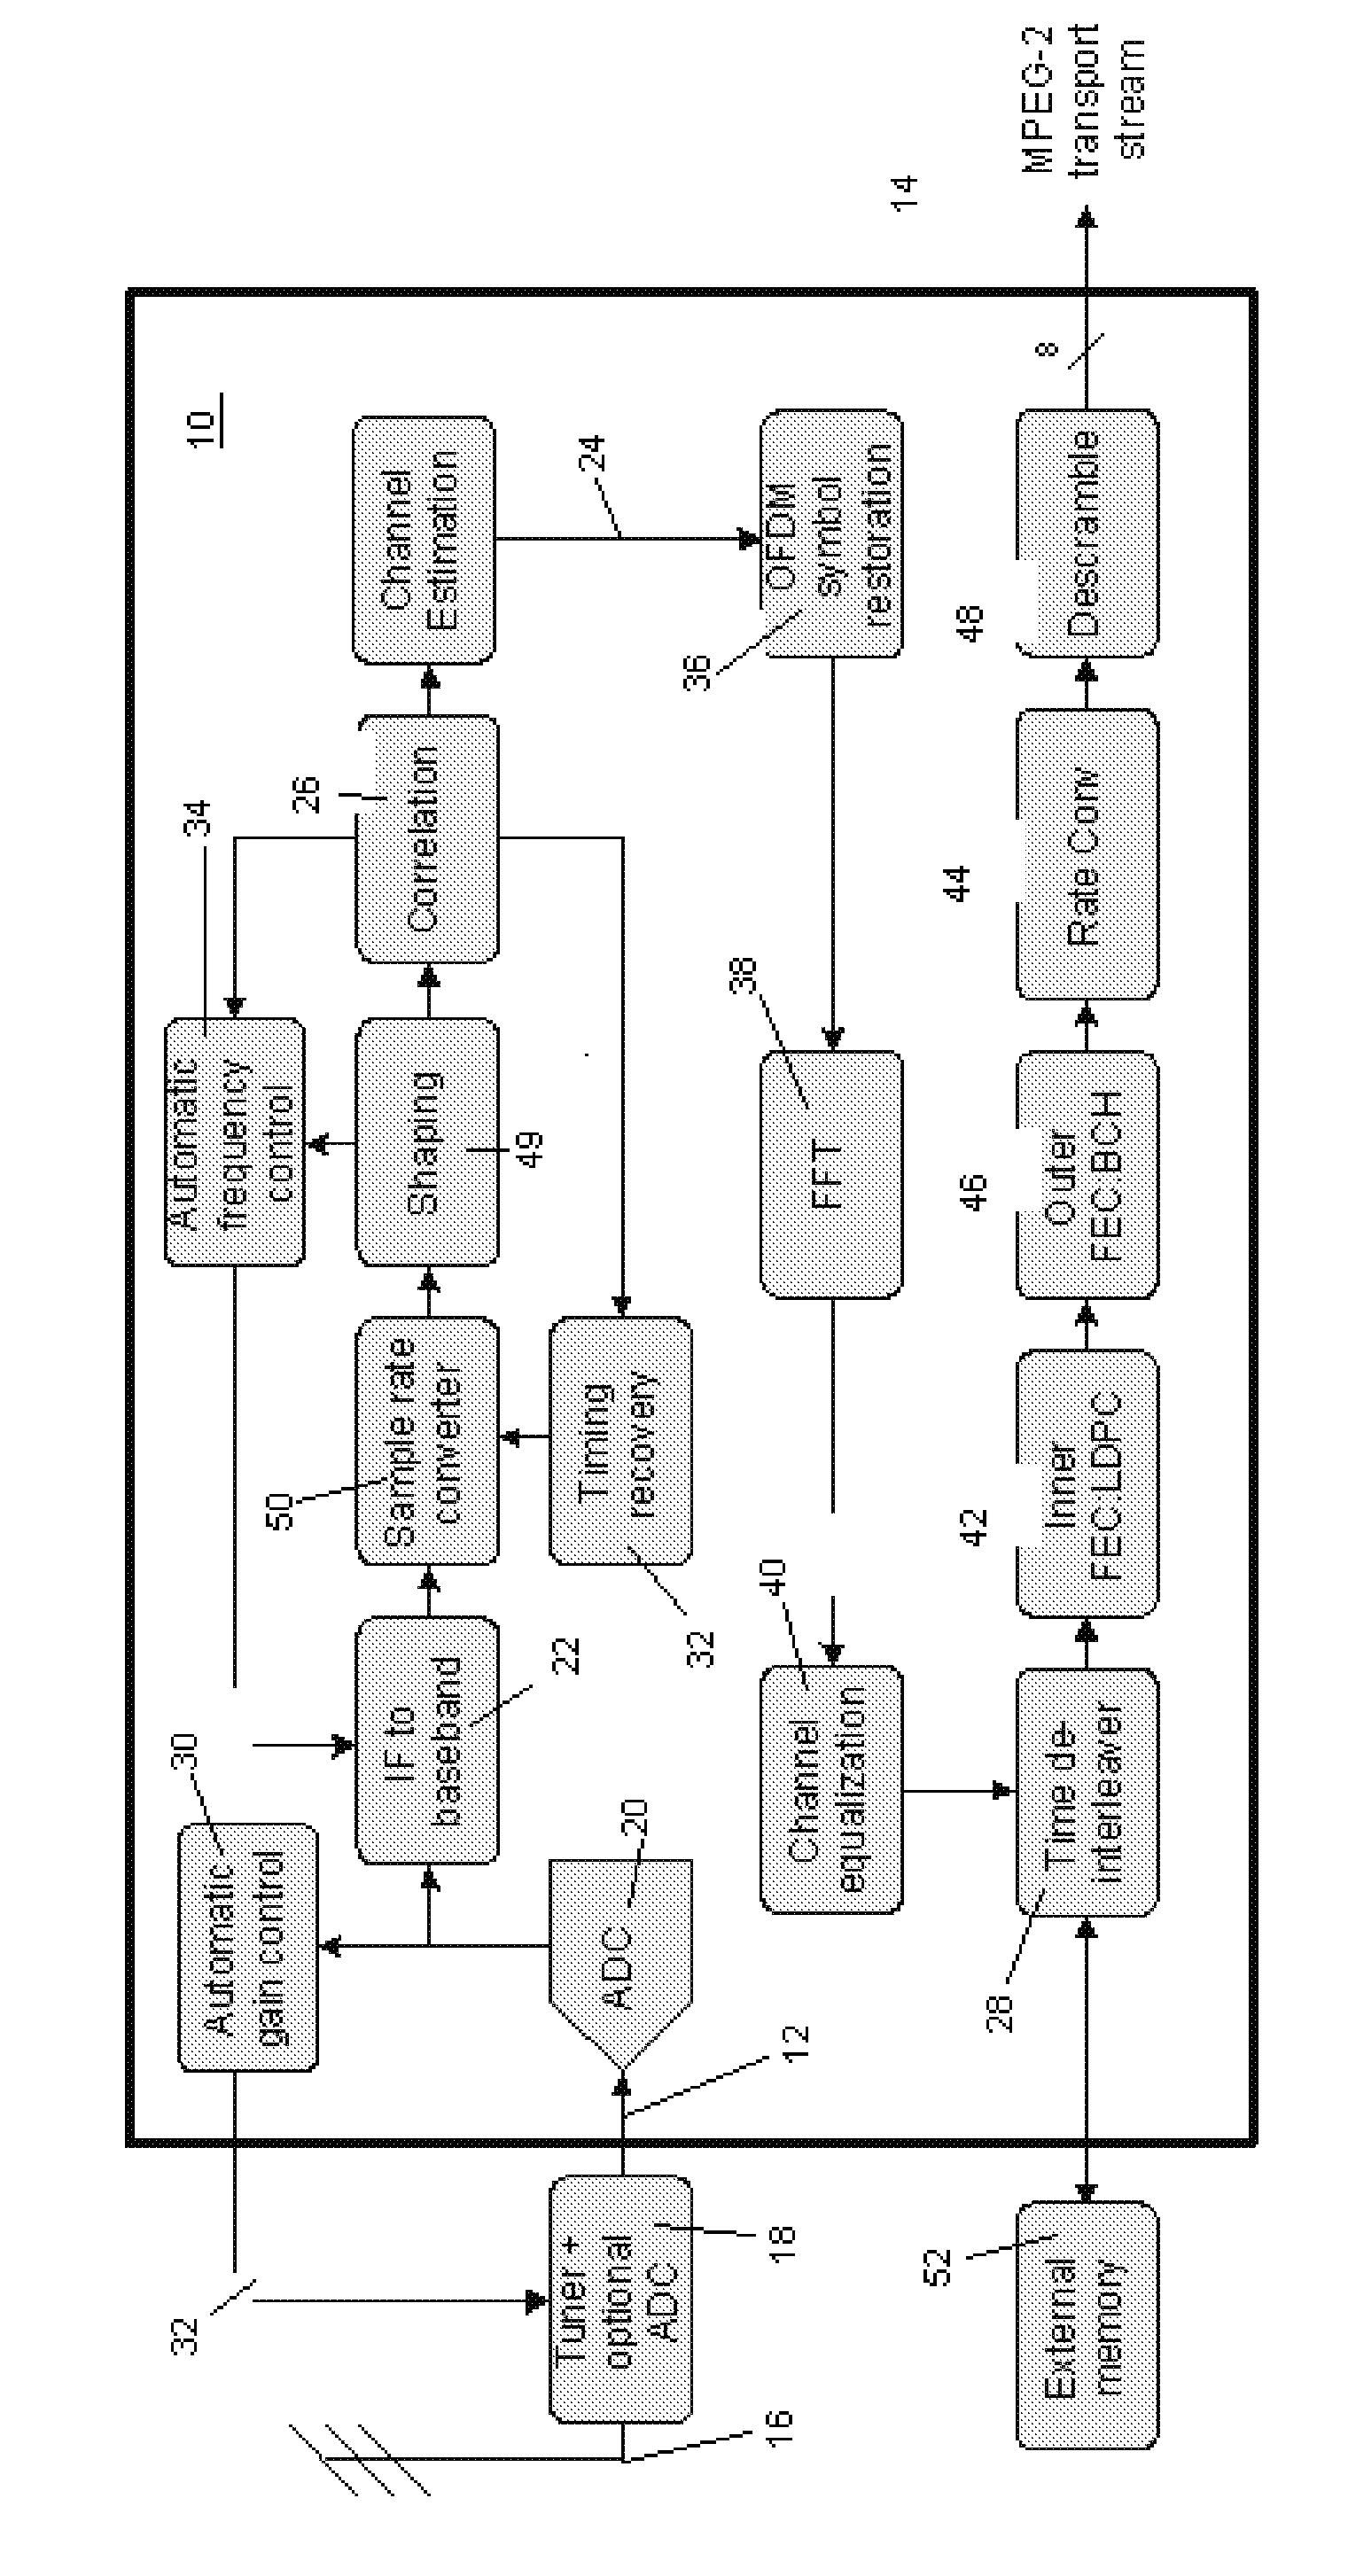 Receiver architecture having a LDPC decoder with an improved llr update method for memory reduction